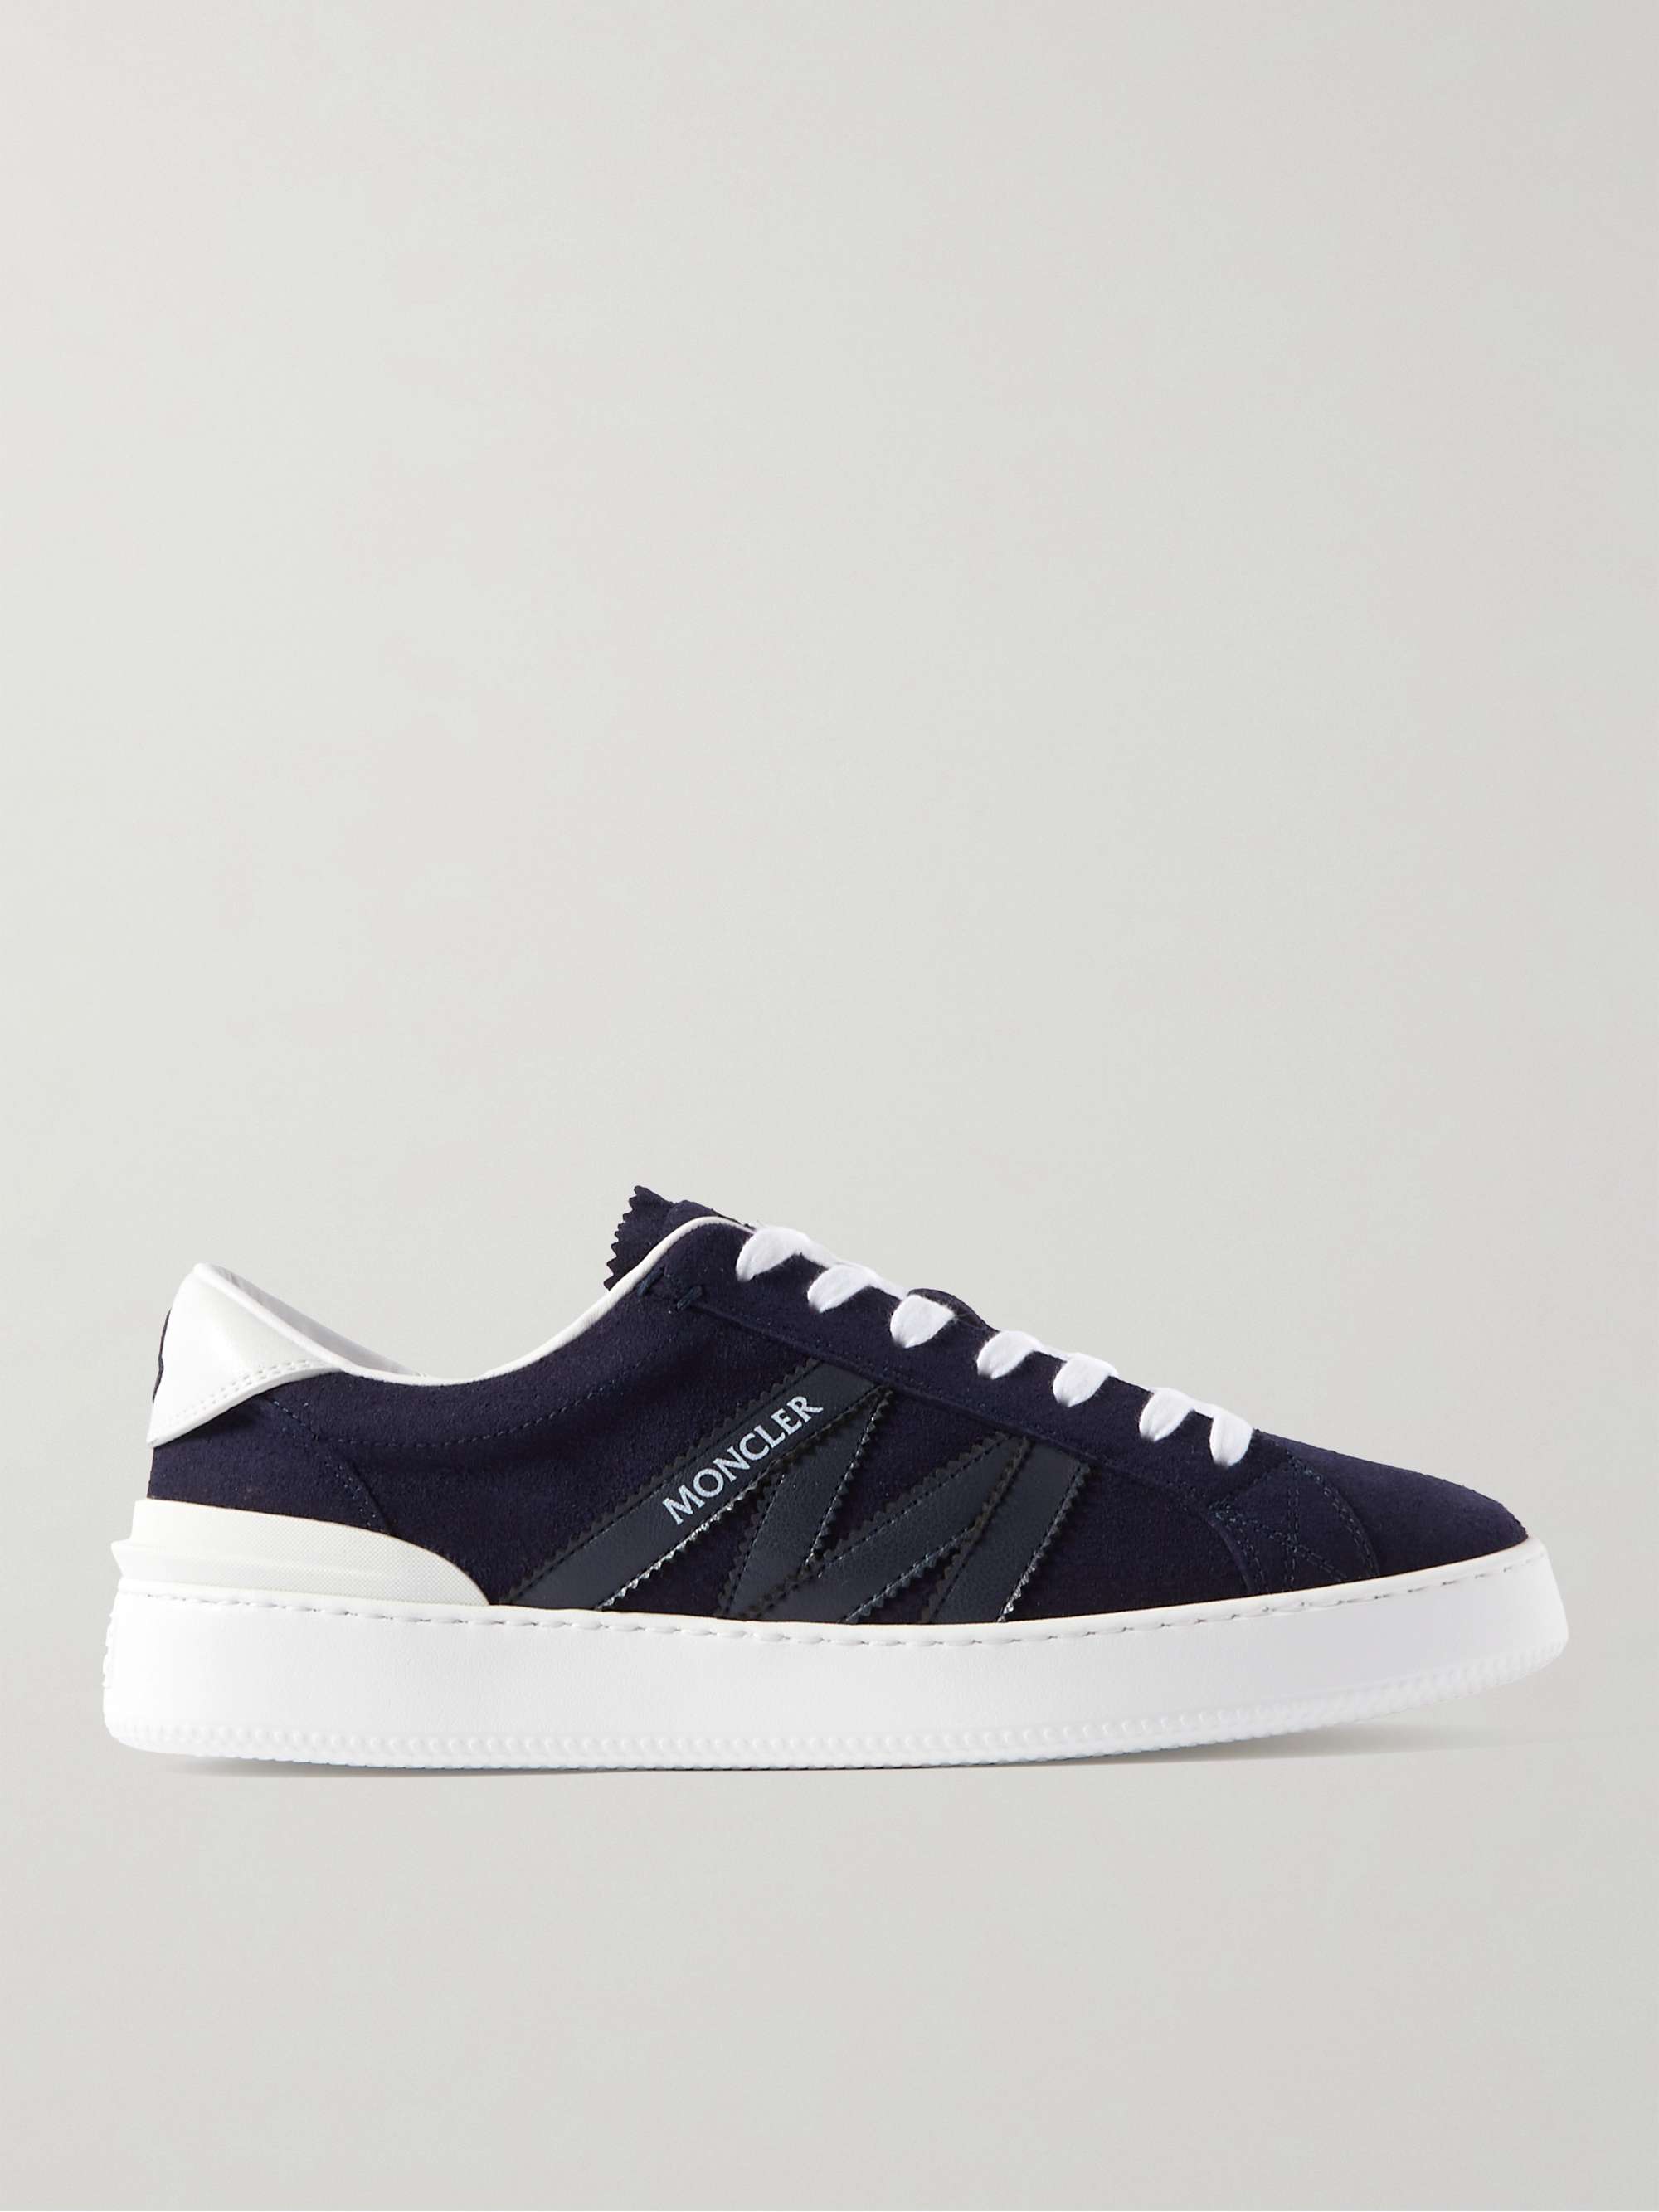 MONCLER Monaco M Leather-Trimmed Suede Sneakers for Men | MR PORTER